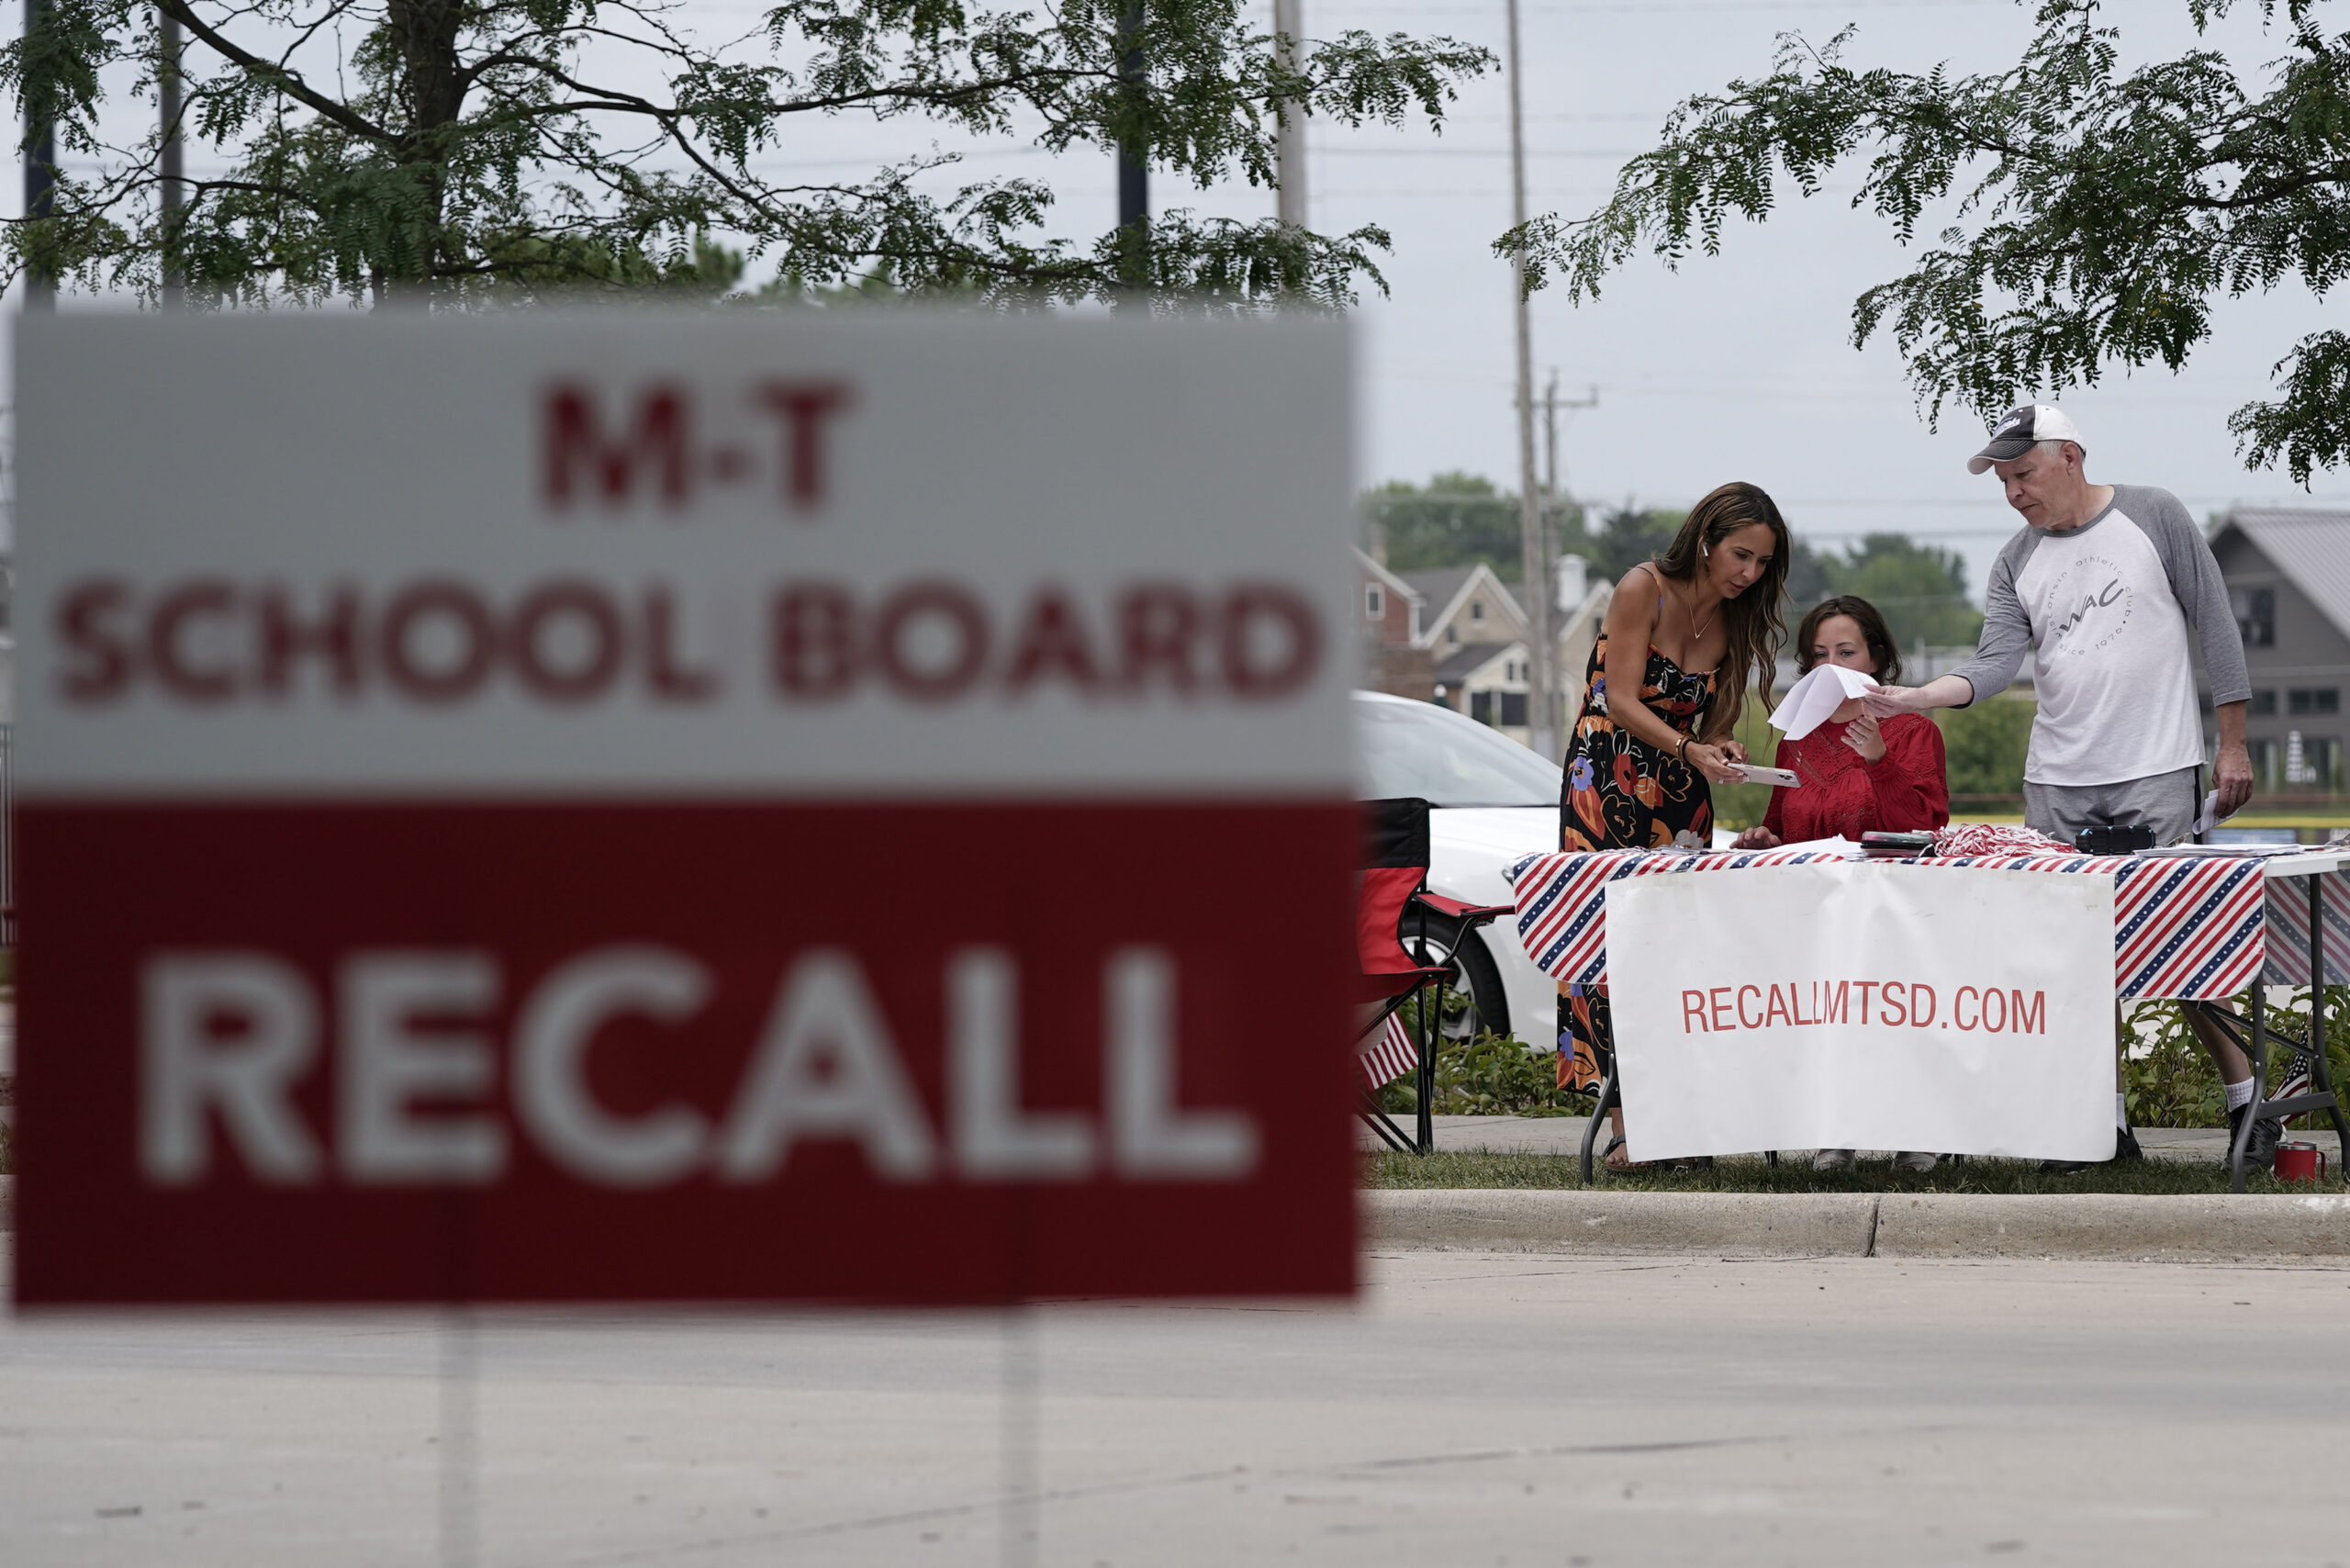 Volunteers collect signatures to recall the entire Mequon-Thiensville School District School Board